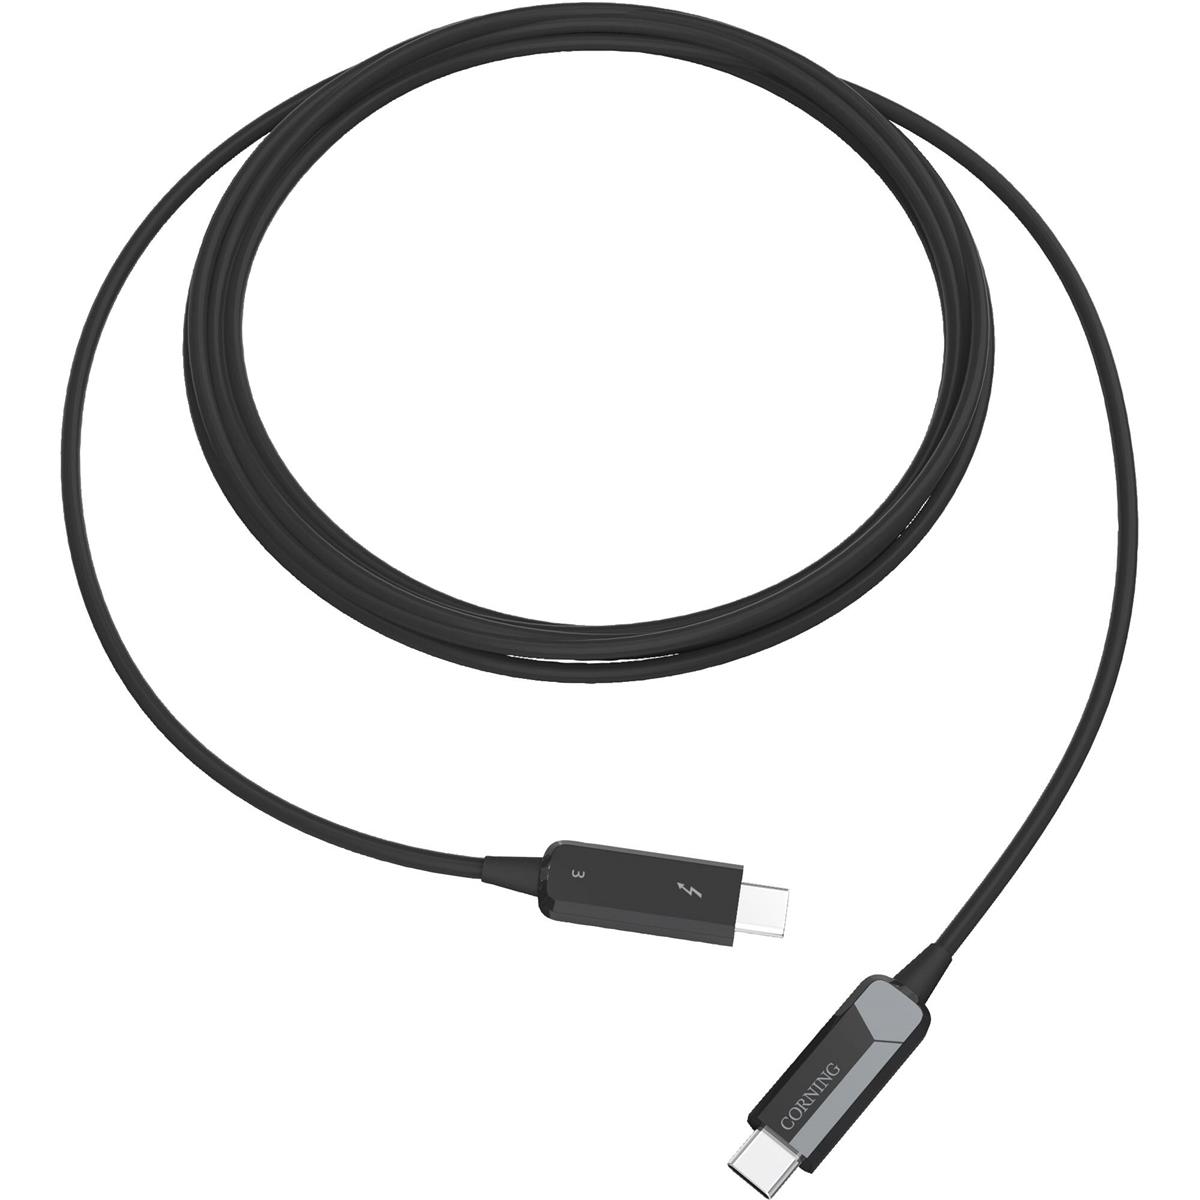 Image of Optical Cables by Corning Thunderbolt 3 USB Type-C Male Optical Cable